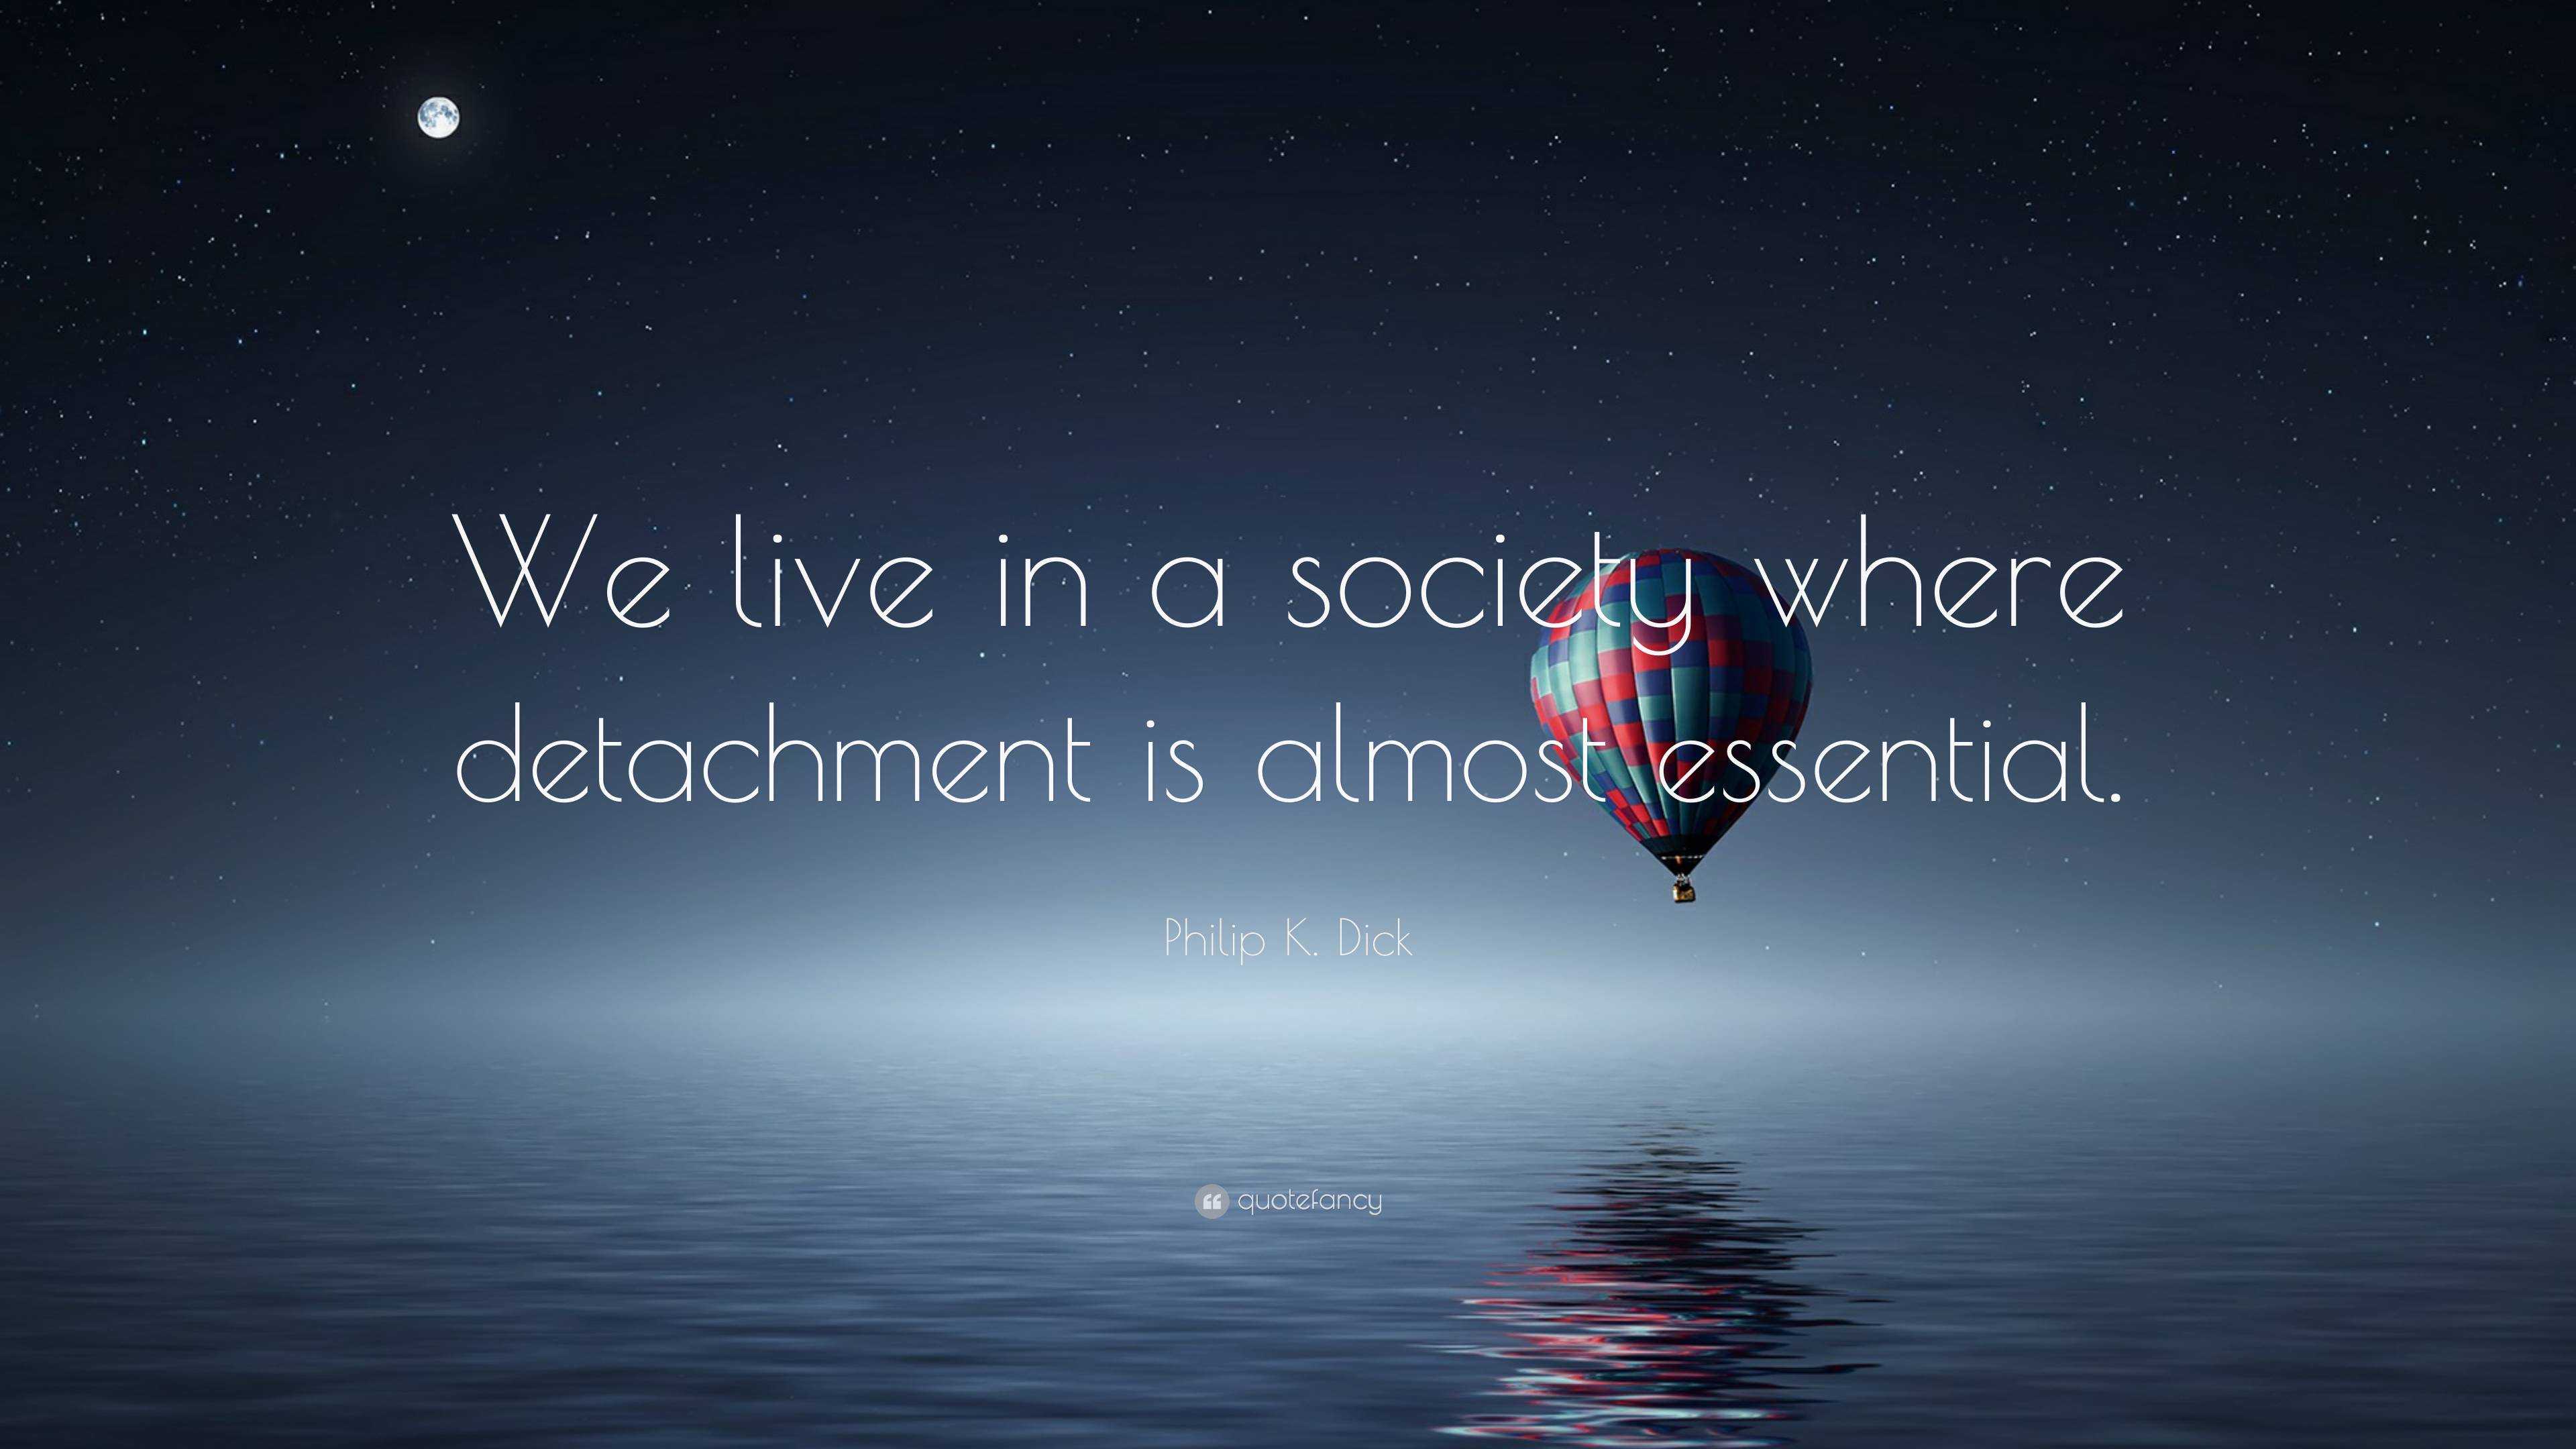 6529028-Philip-K-Dick-Quote-We-live-in-a-society-where-detachment-is.jpg